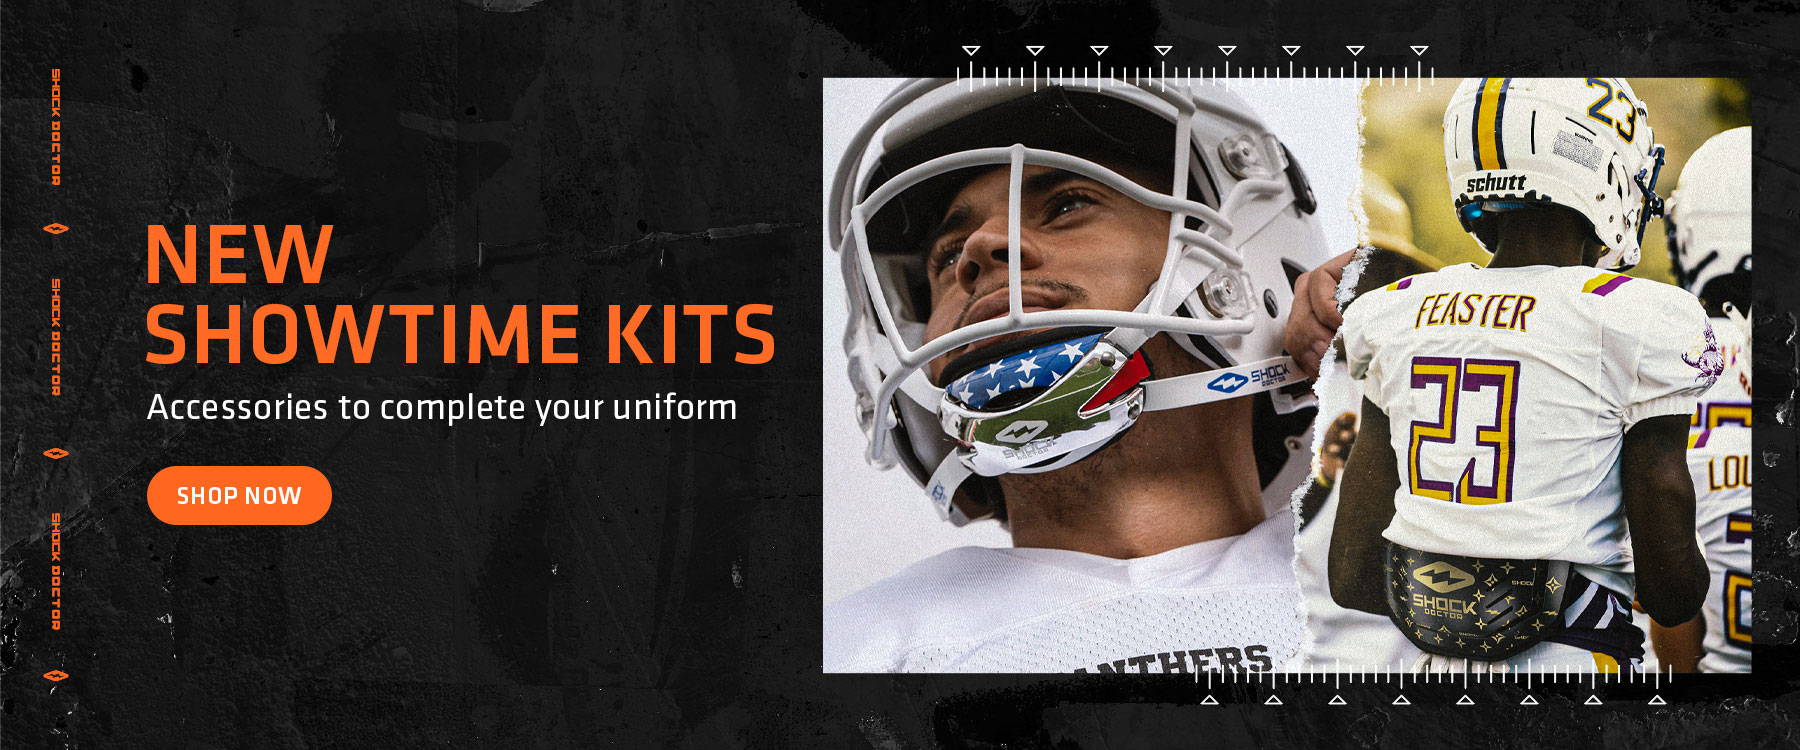 New Showtime Kits - Accessories to complete your uniform - Shop Now